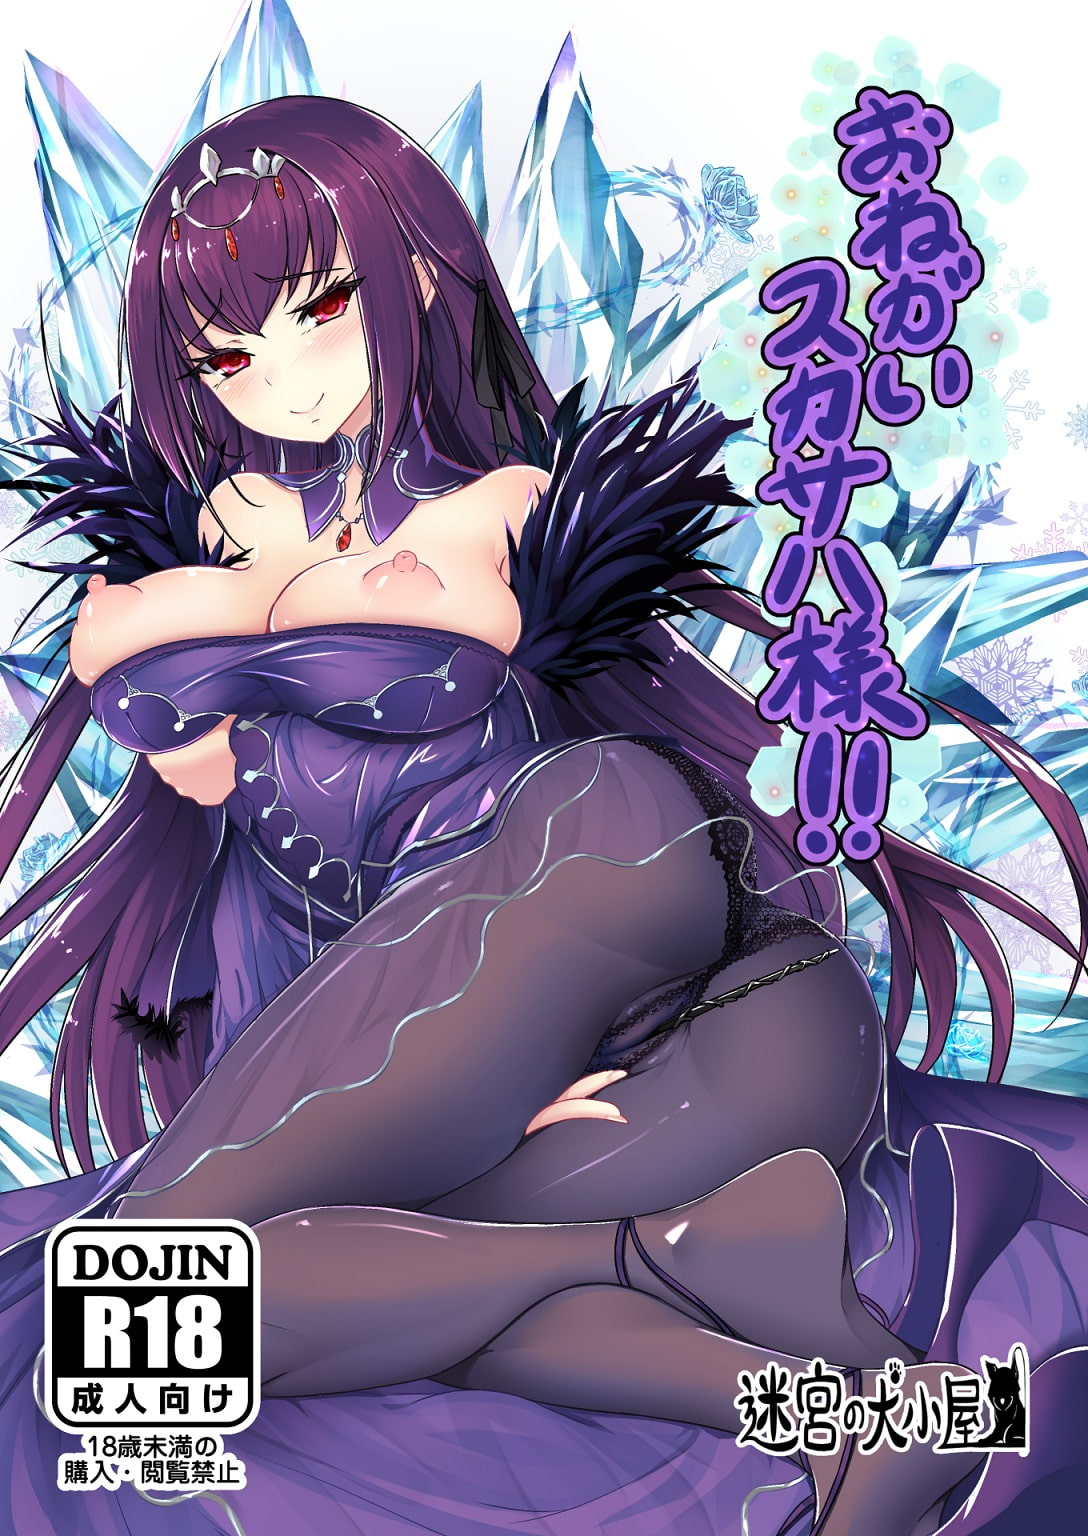 Please, Scathach!